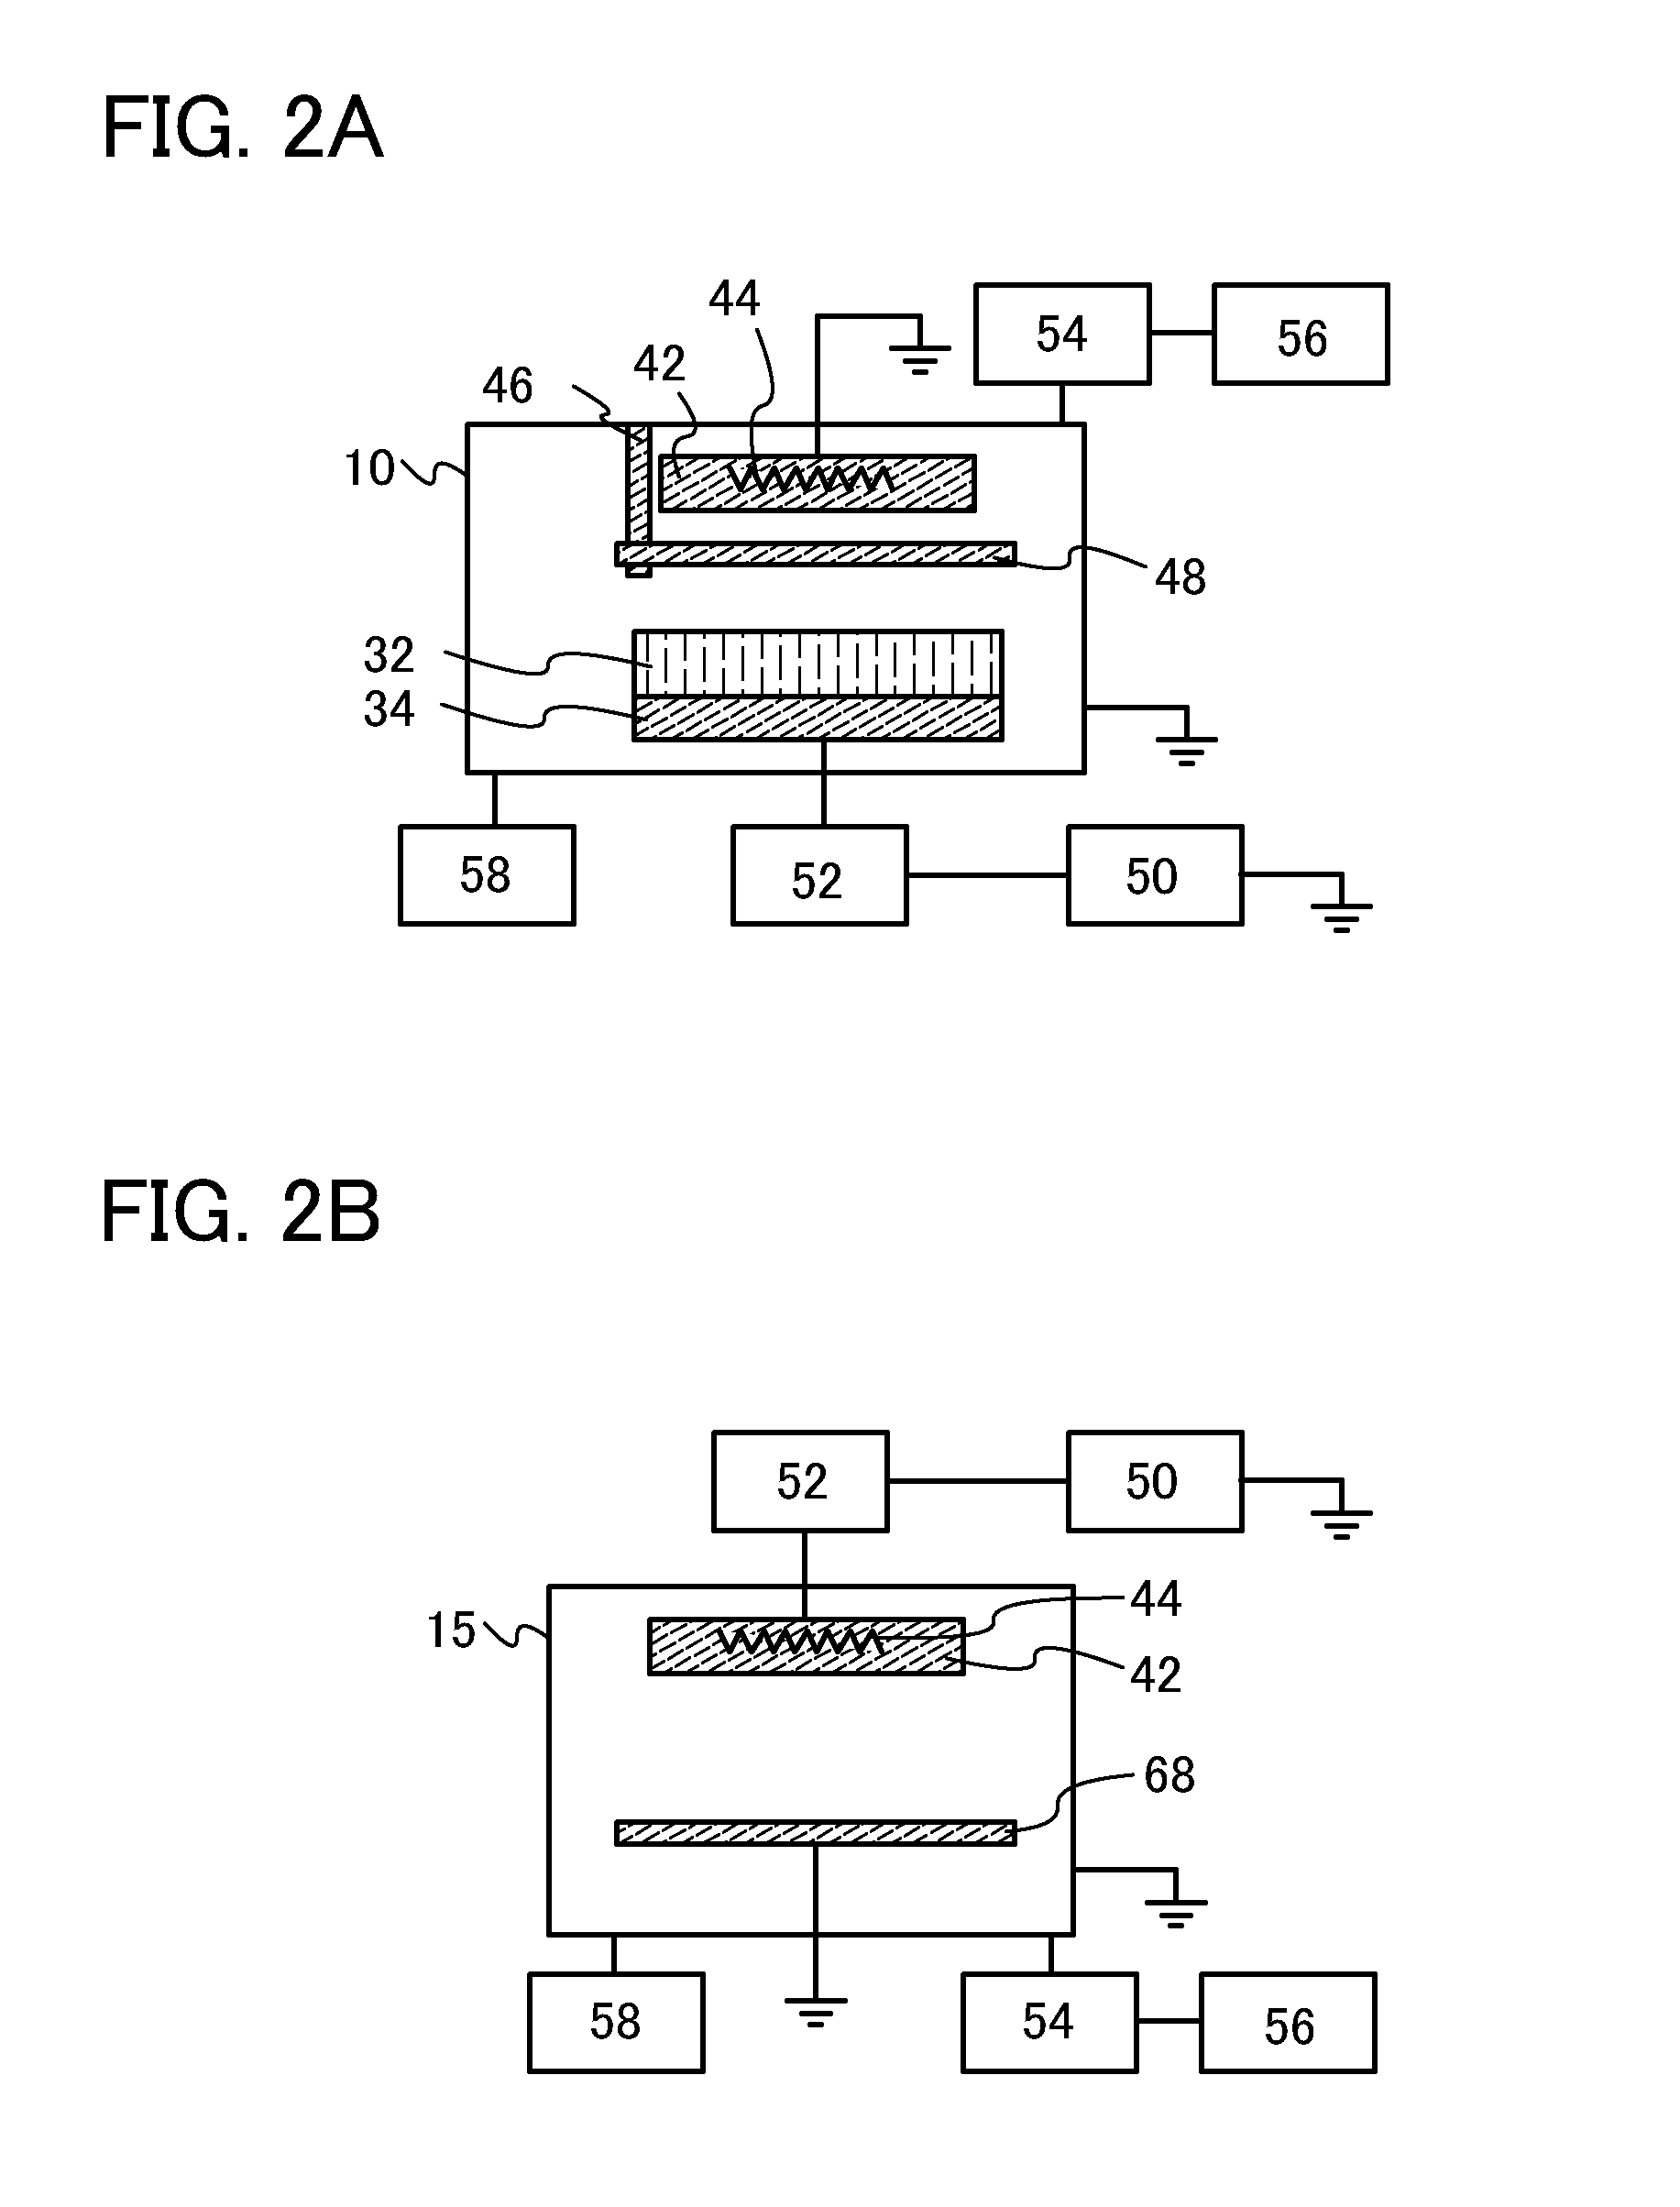 Film formation apparatus and film formation method